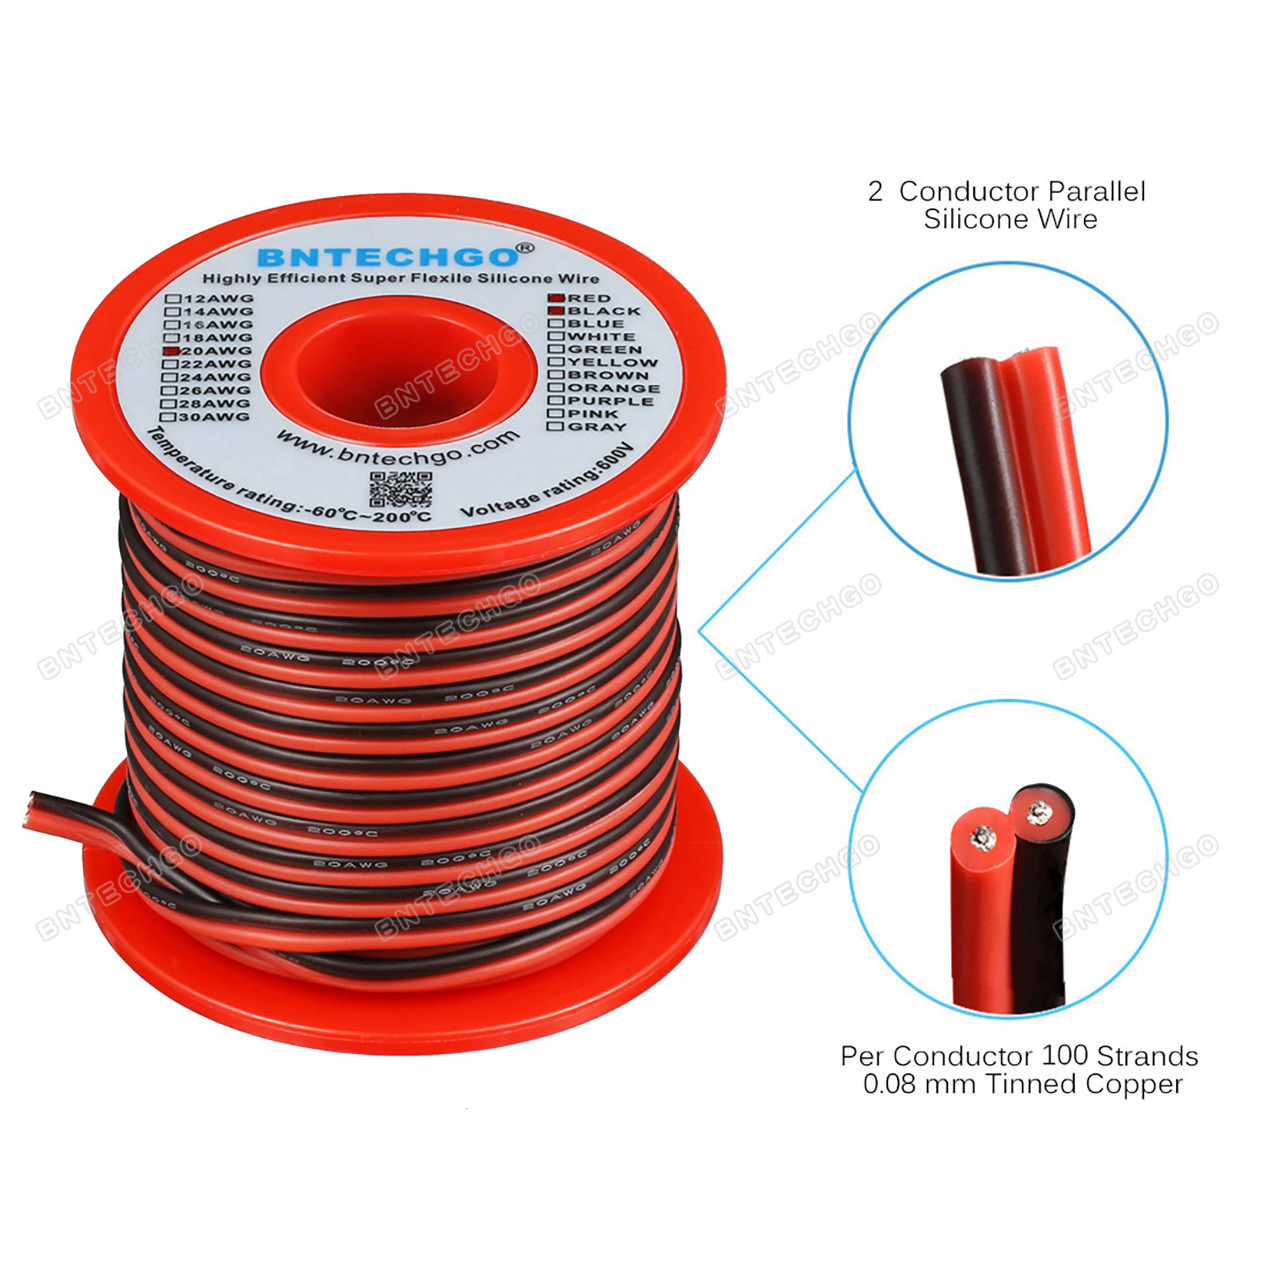 BNTECHGO 20 Gauge Flexible 2 Conductor Parallel Silicone Wire Spool Red  Black High Resistant 200 deg C 600V for Single Color LED Strip Extension  Cable Cord,Model,50ft Stranded Tinned Copper Wire 